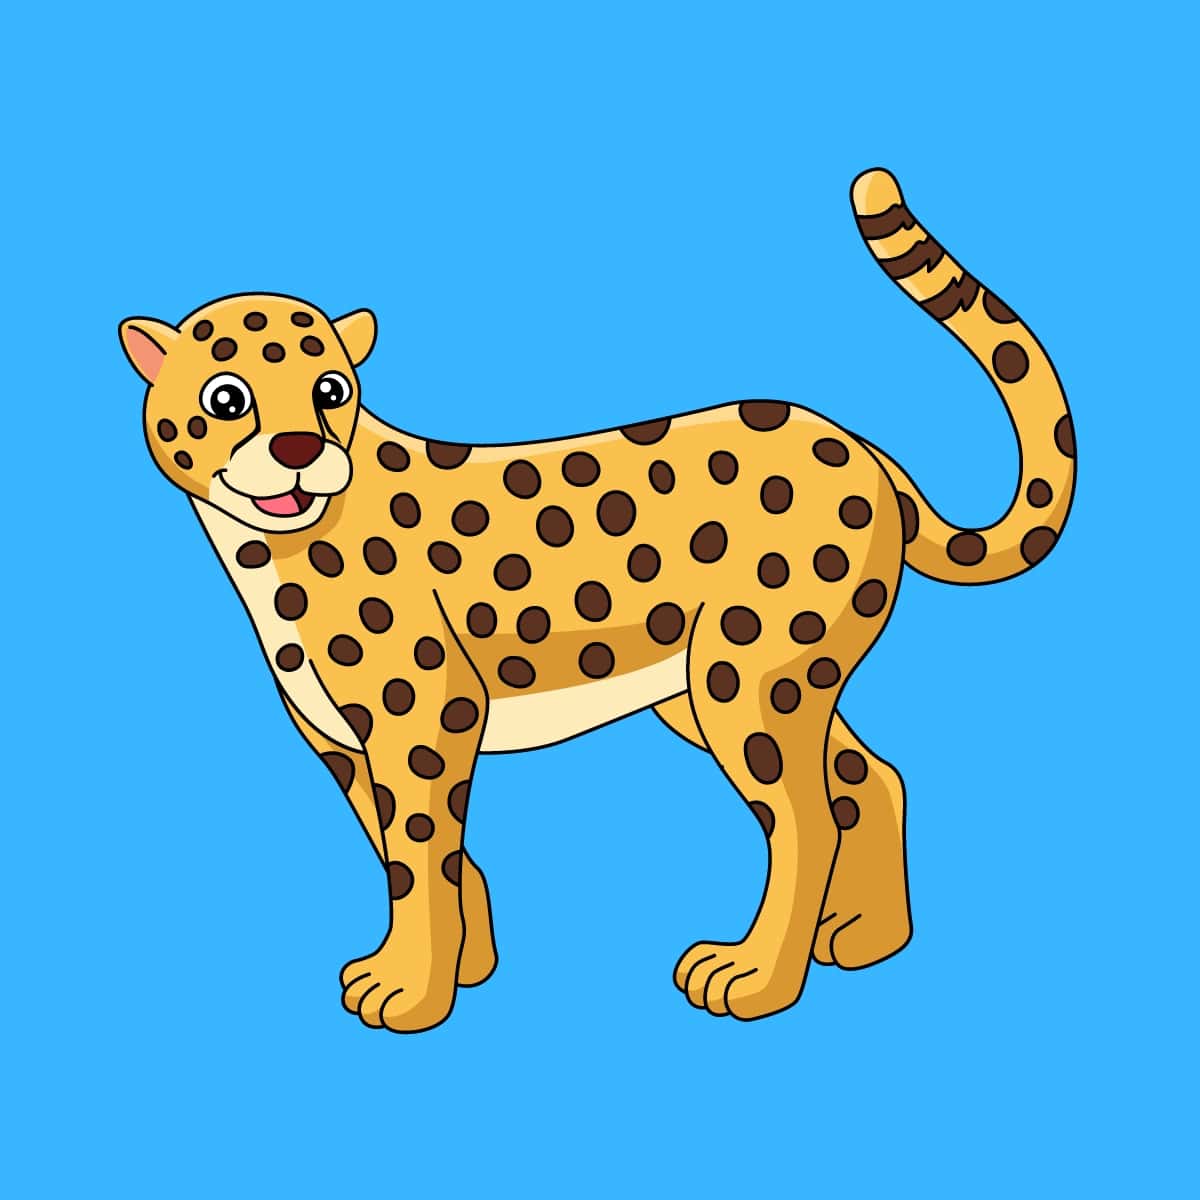 Cartoon graphic of a smiling cheetah standing on a blue background.